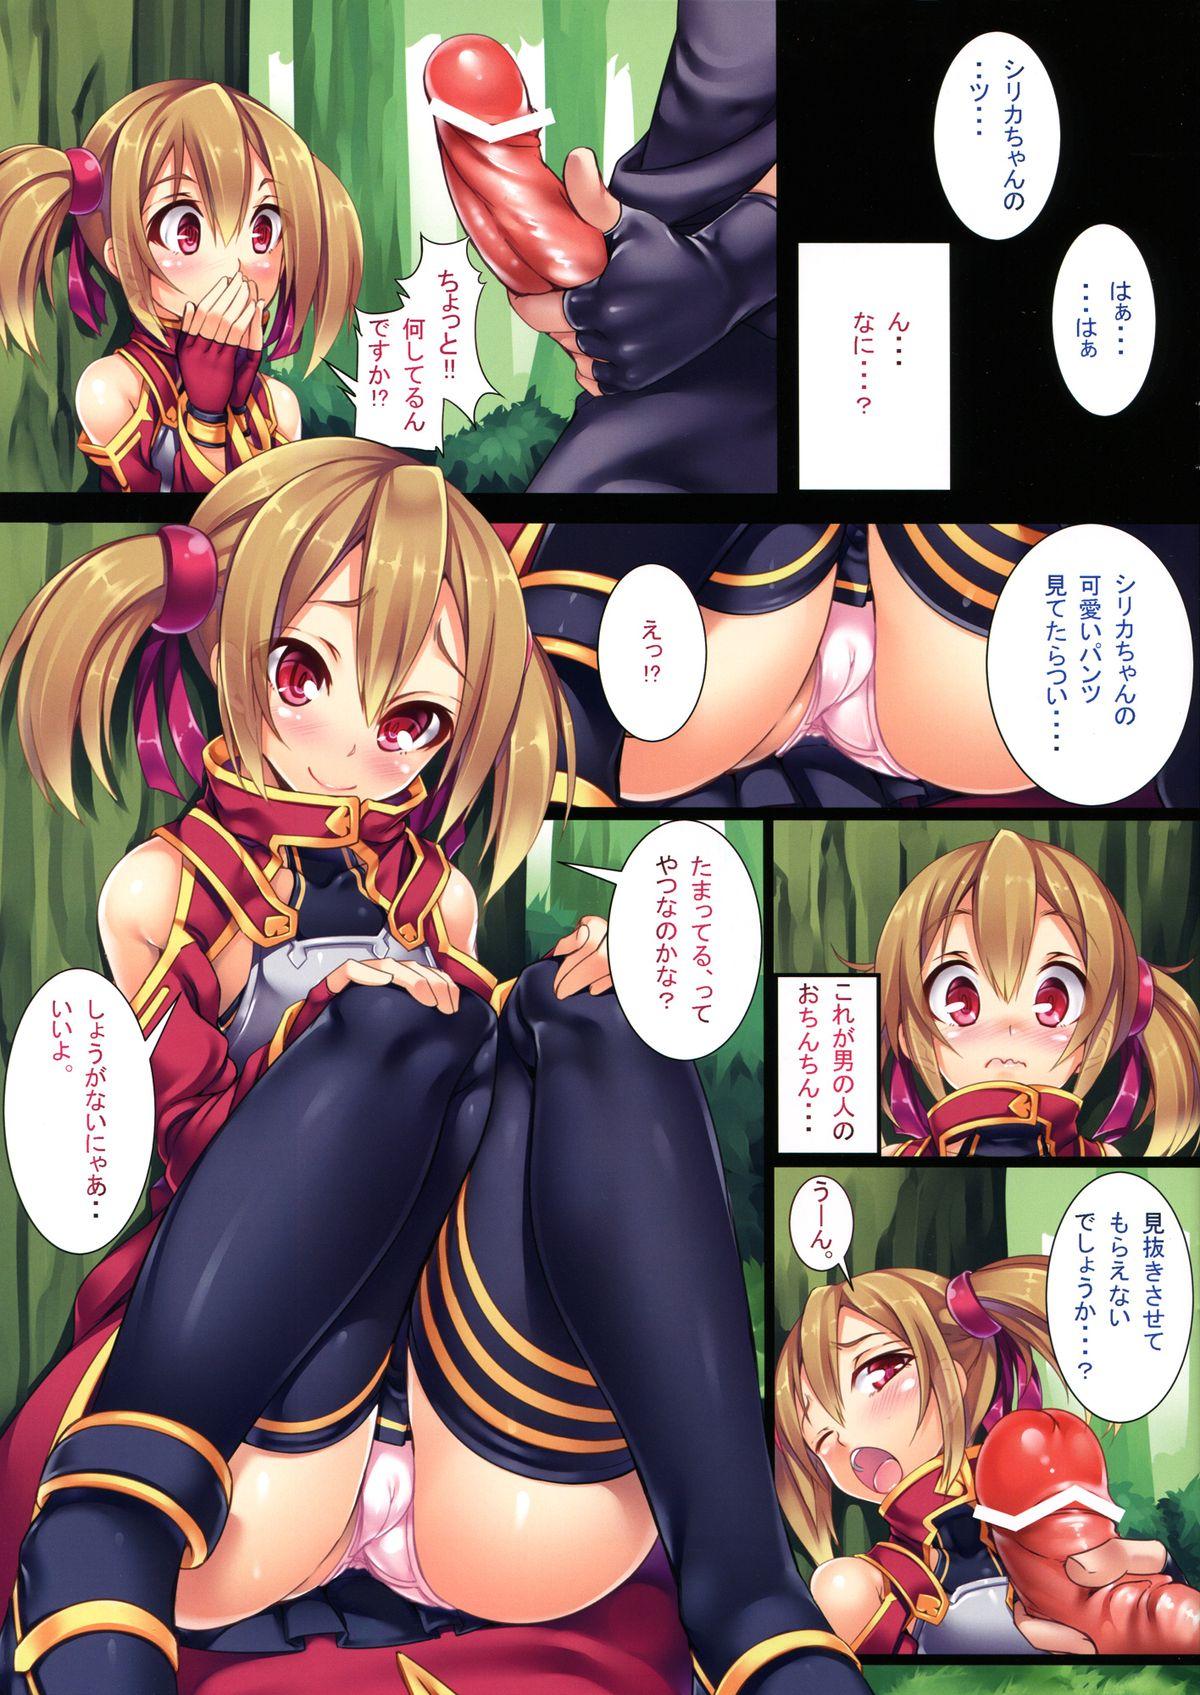 LR-02 Page 3 Of 16 sword art online hentai haven, LR-02 Page 3 Of 16 sword ...